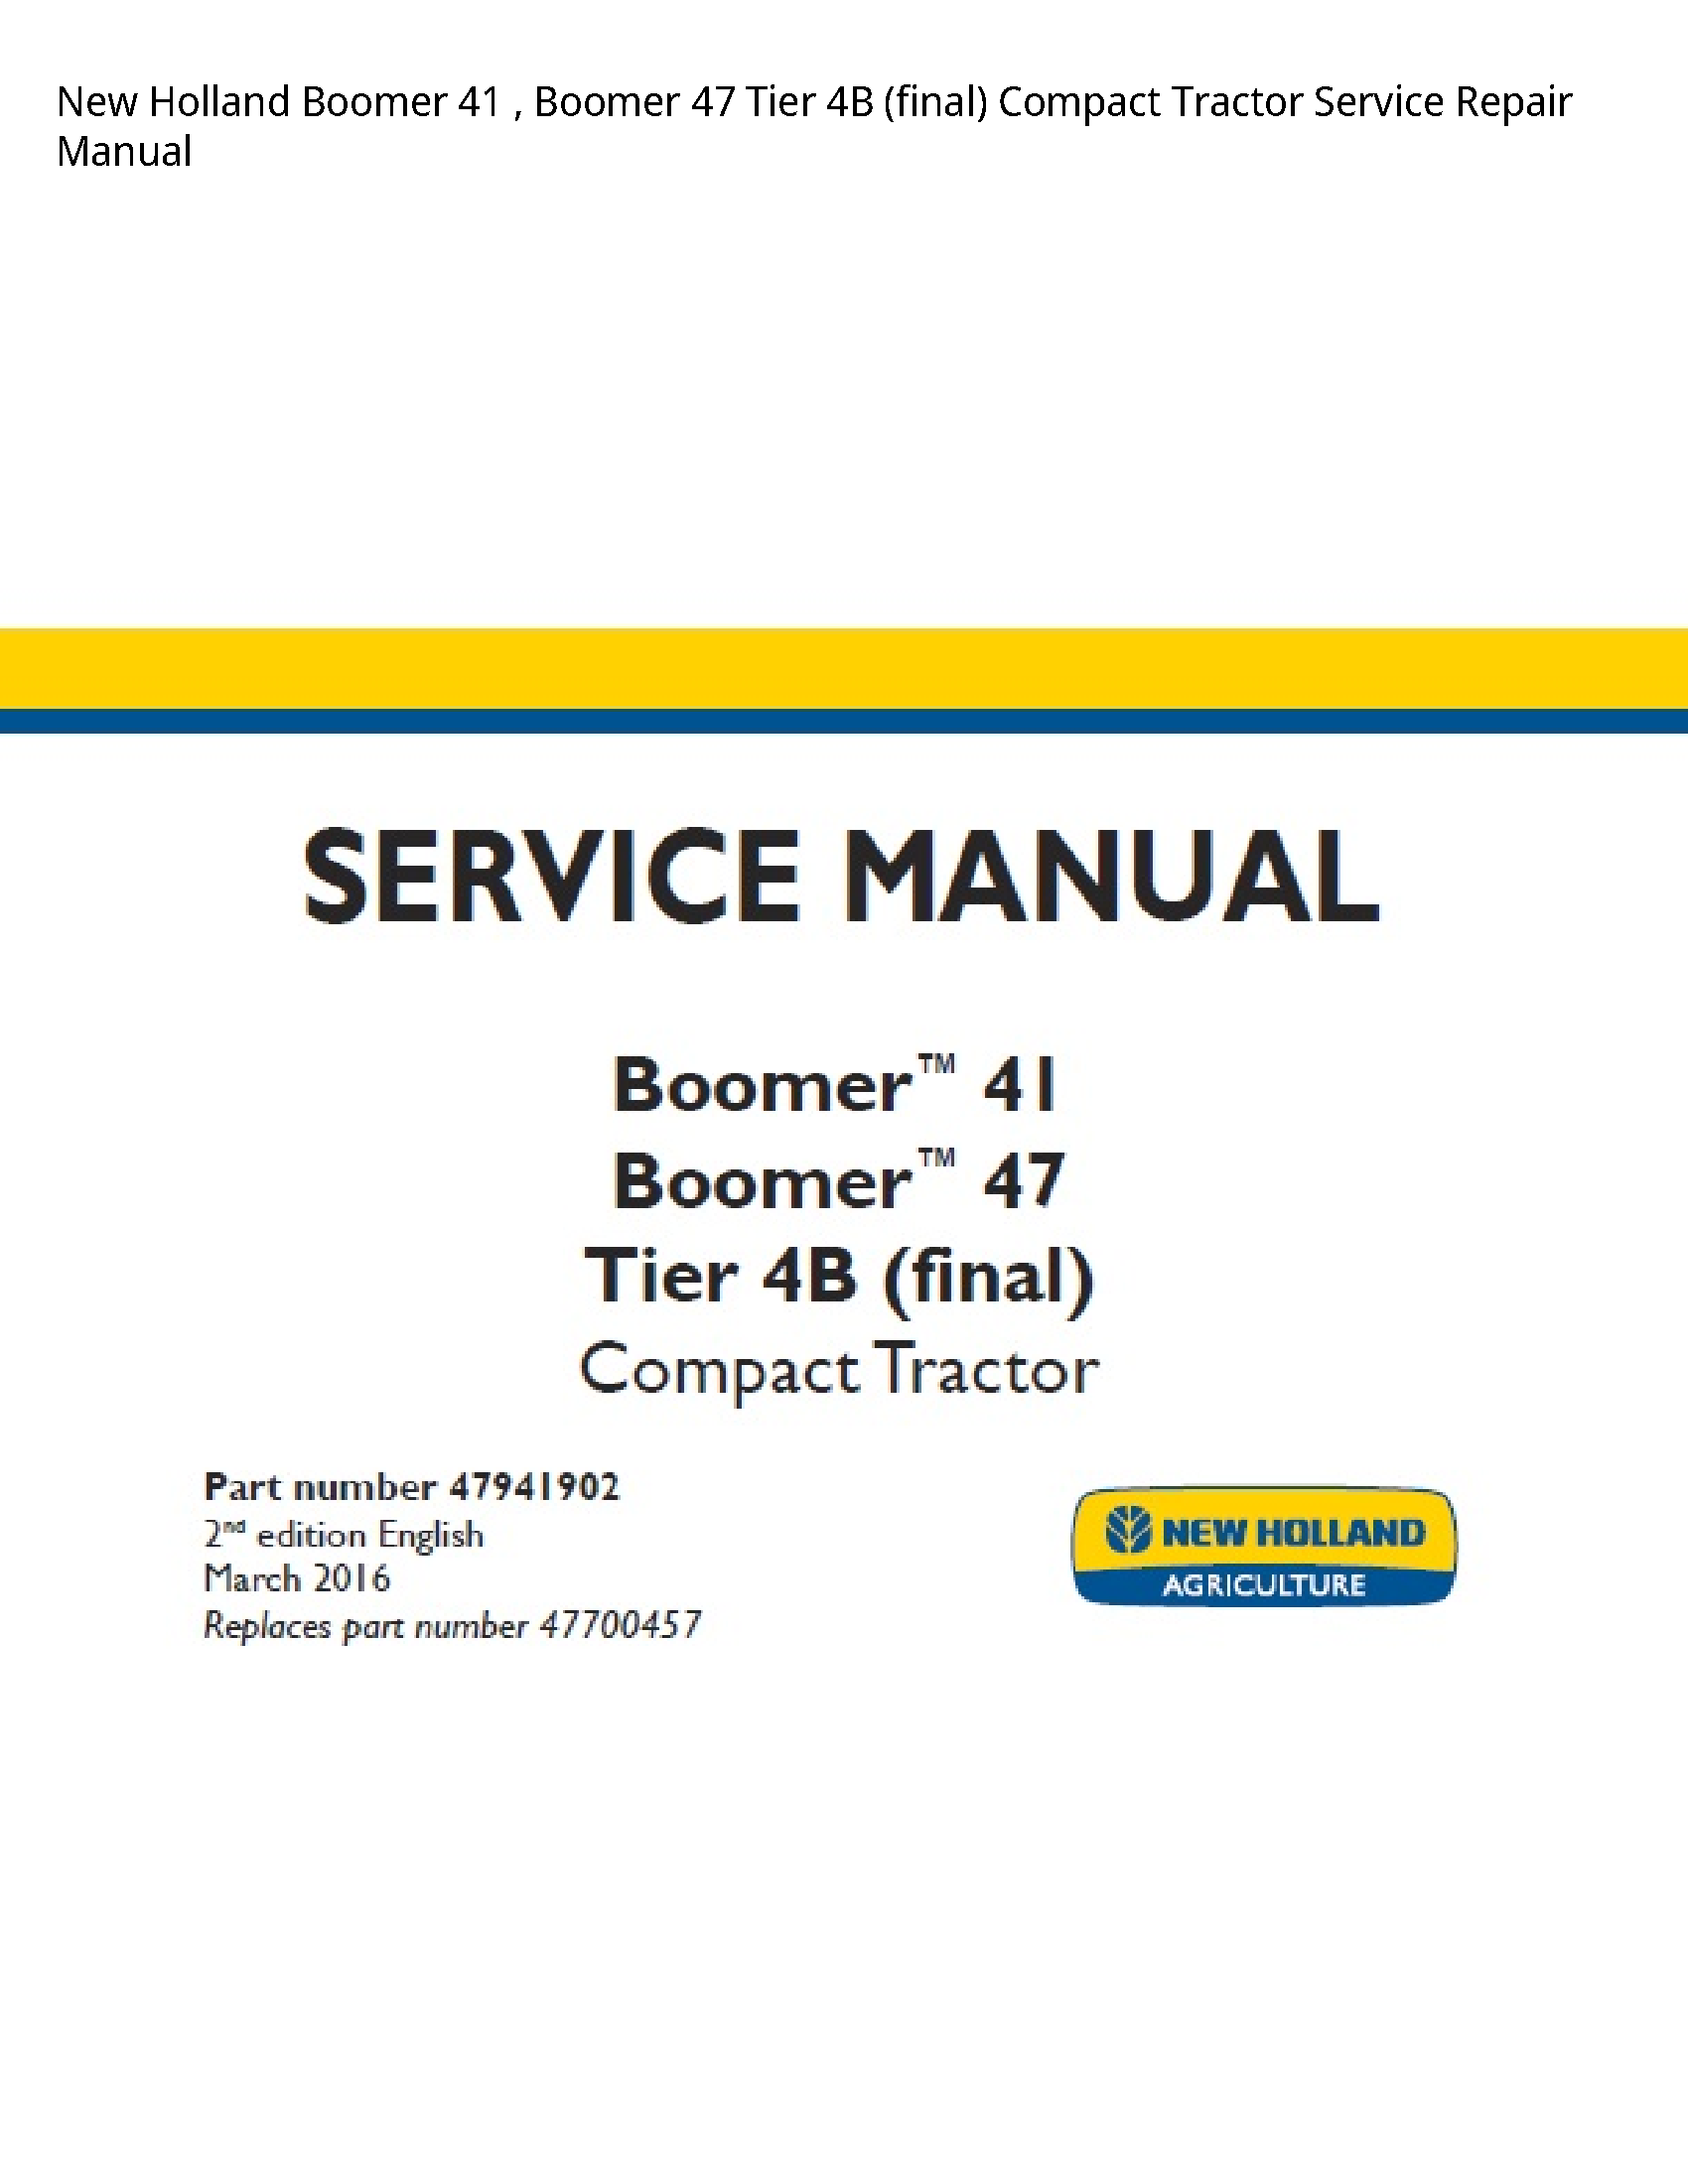 New Holland 41 Boomer Boomer Tier (final) Compact Tractor manual